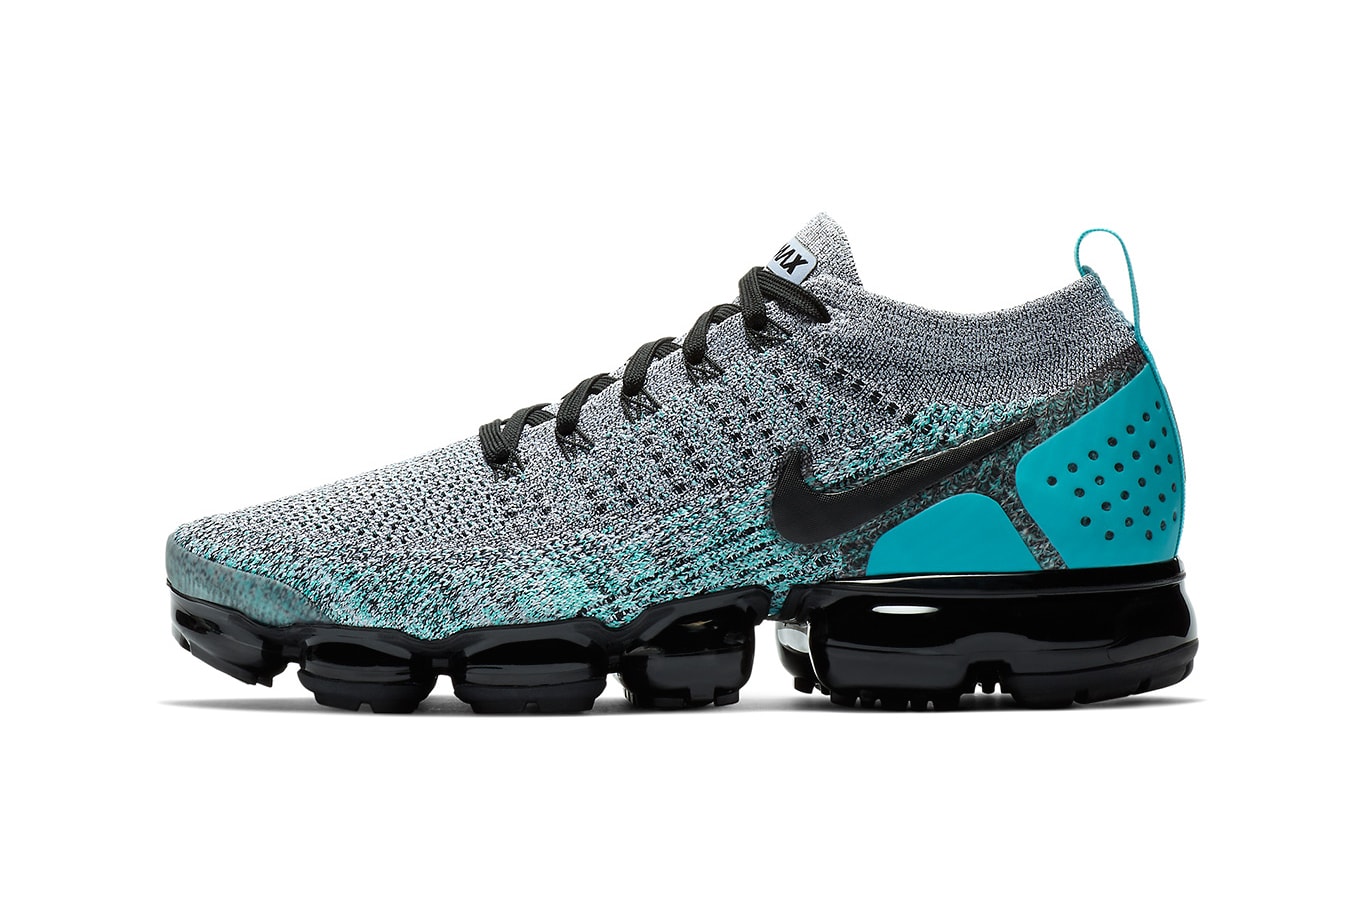 Nike Vapormax Flyknit 2.0 Three New Colors Air Max Day Pink Ice Blue Black Sneakers Shoes Running Training